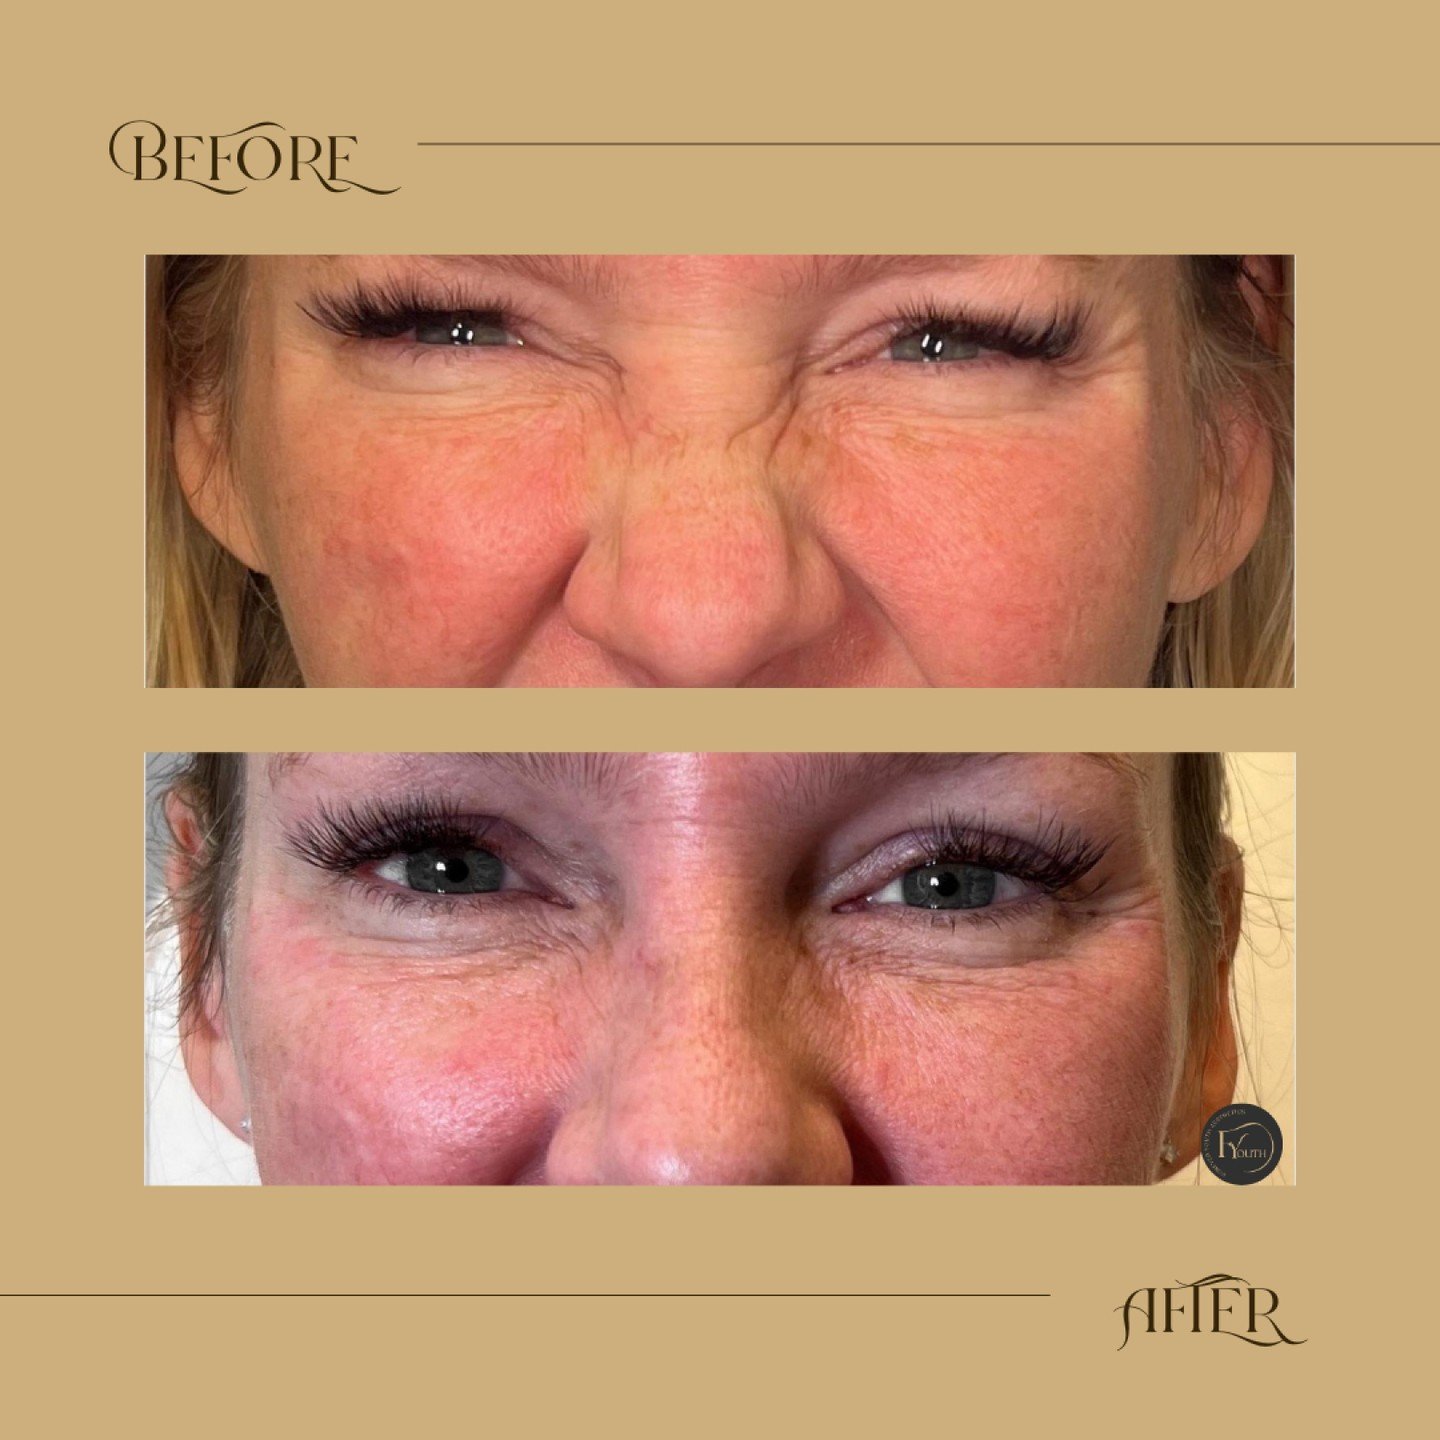 Say goodbye to nose wrinkles and bunny lines! 

These wrinkles, often seen when smiling or laughing, are caused by the repeated contraction of the nasalis muscle.

Our targeted treatment involves a precise application of Neuromodulators (Botox, Dyspo